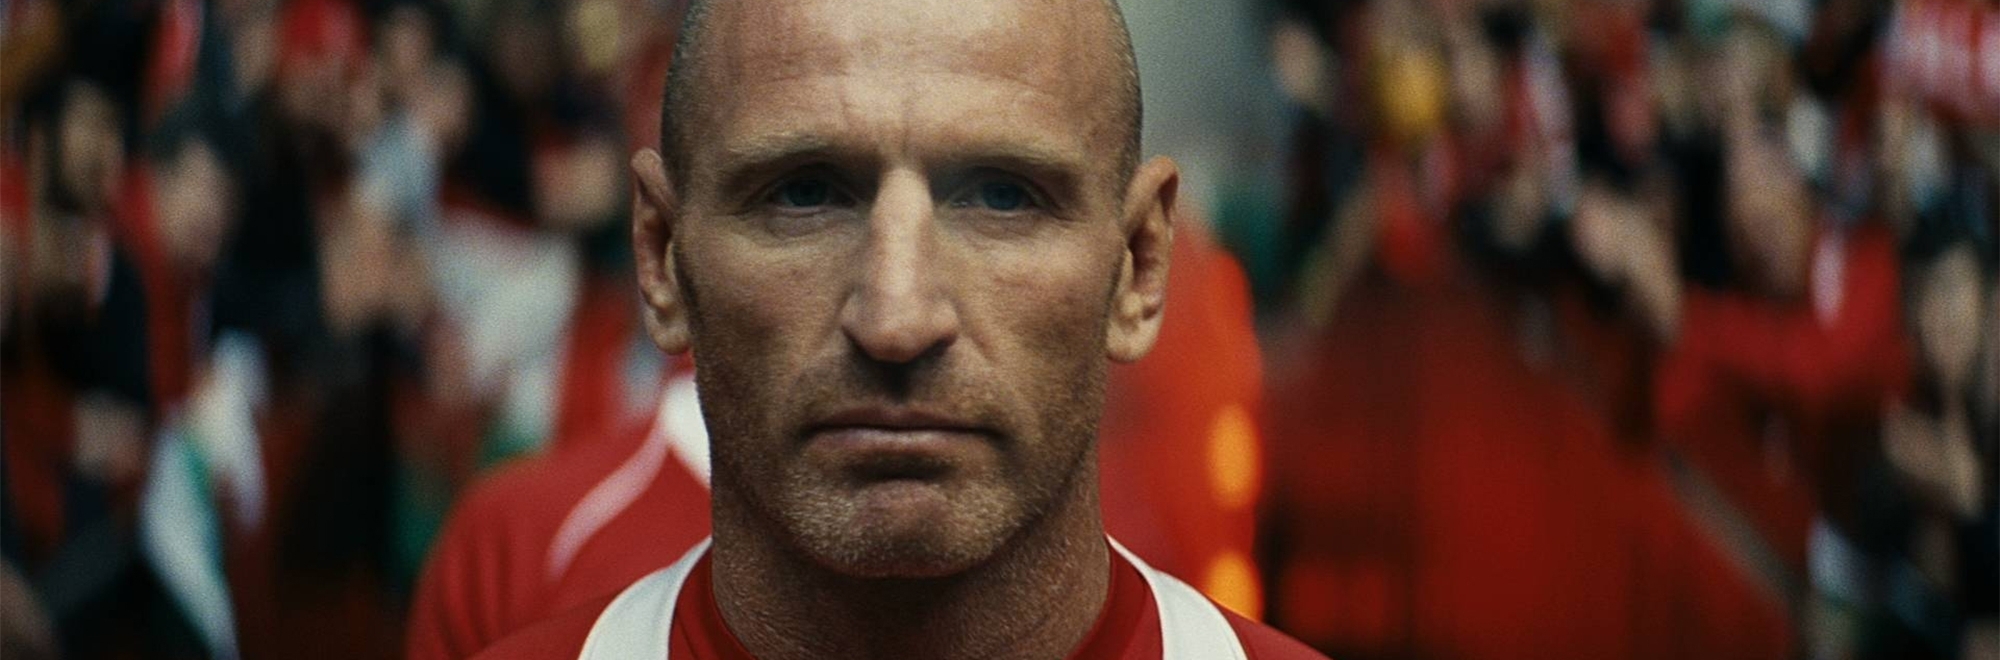 Now would be a great time for Guinness to build upon its ad, Never Alone, featuring rugby hero Gareth Thomas